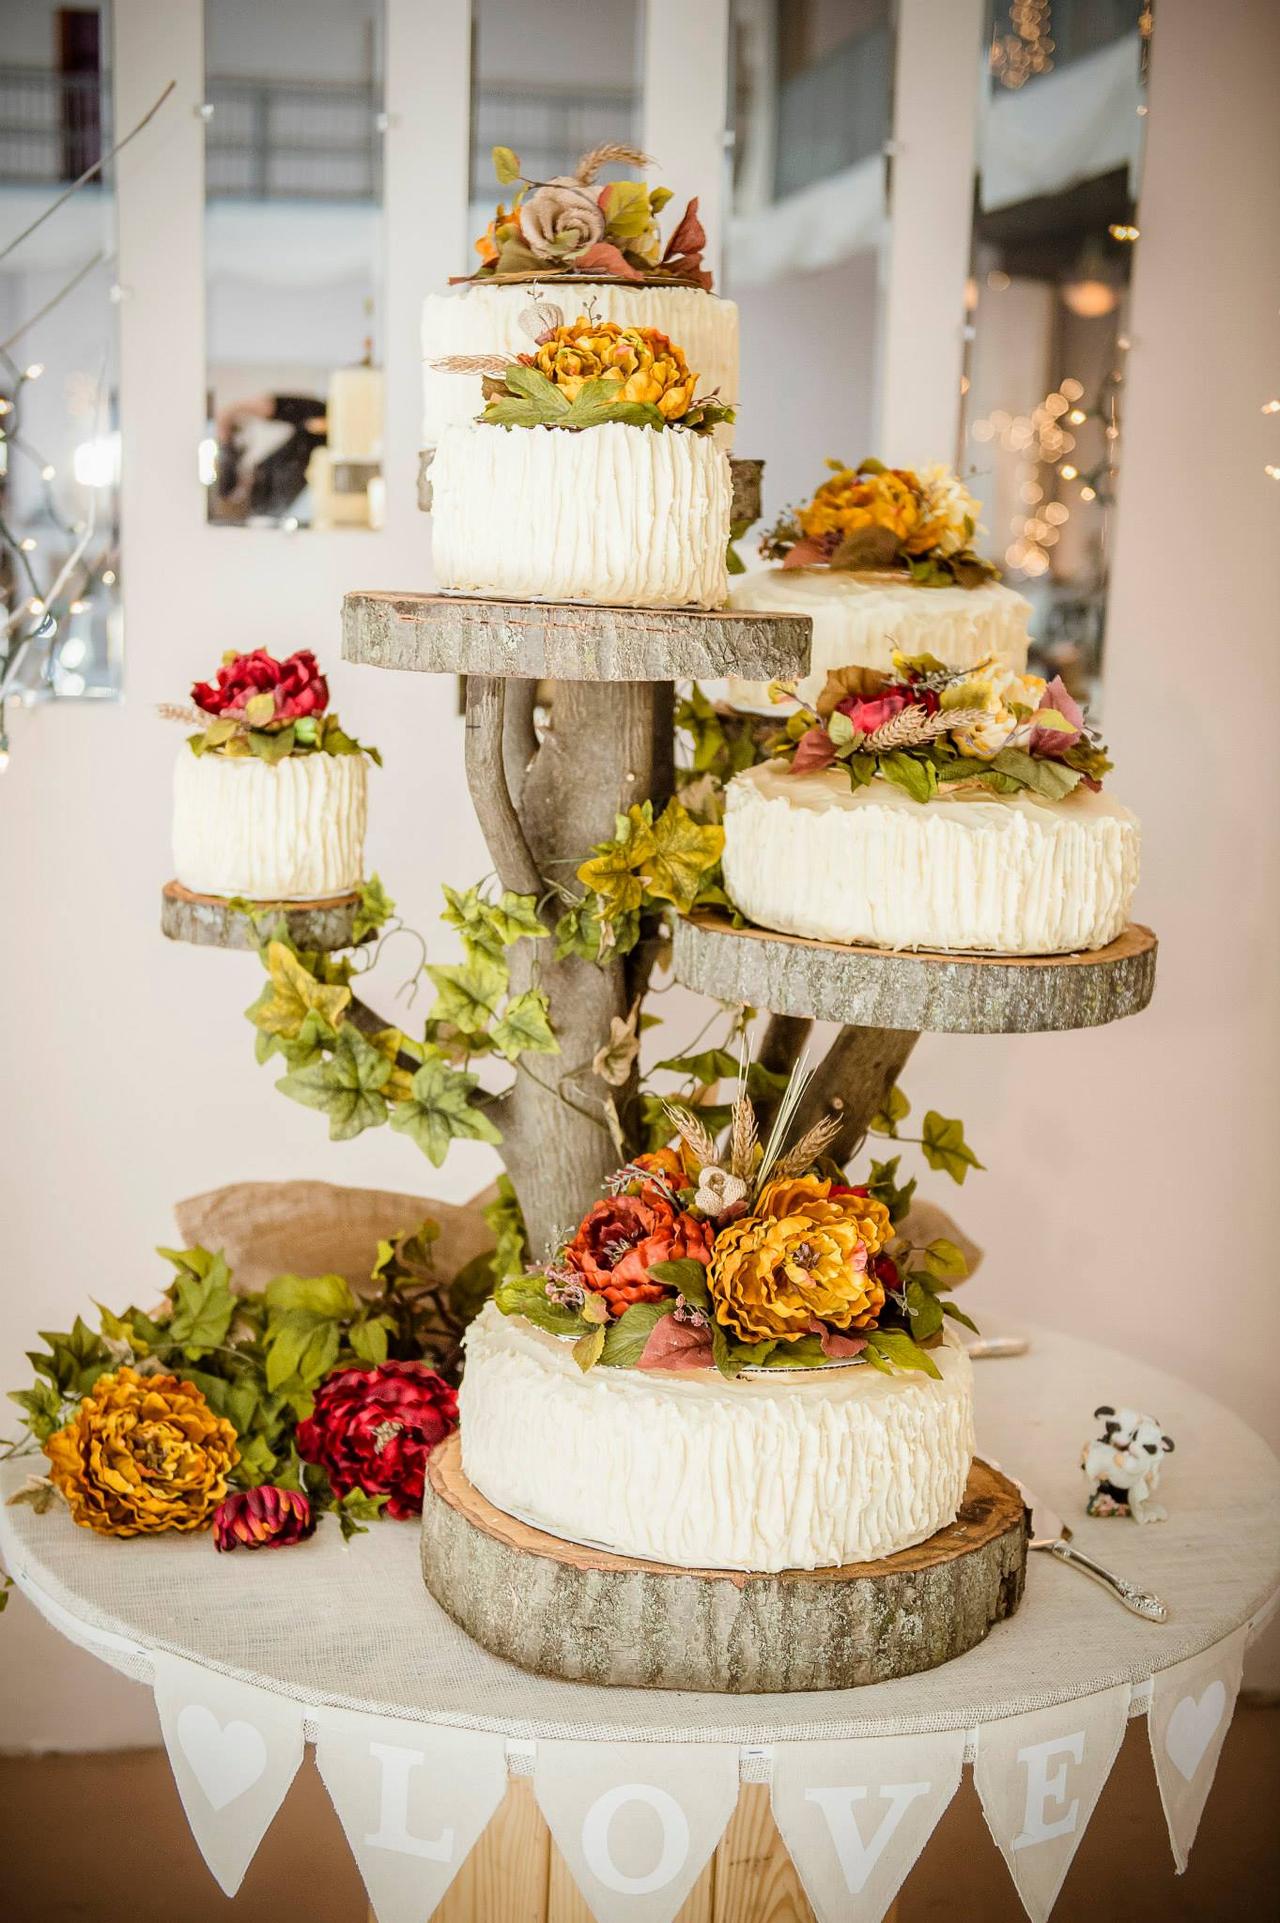 84589 23 Rustic Wedding Cake Seperate Tiered 